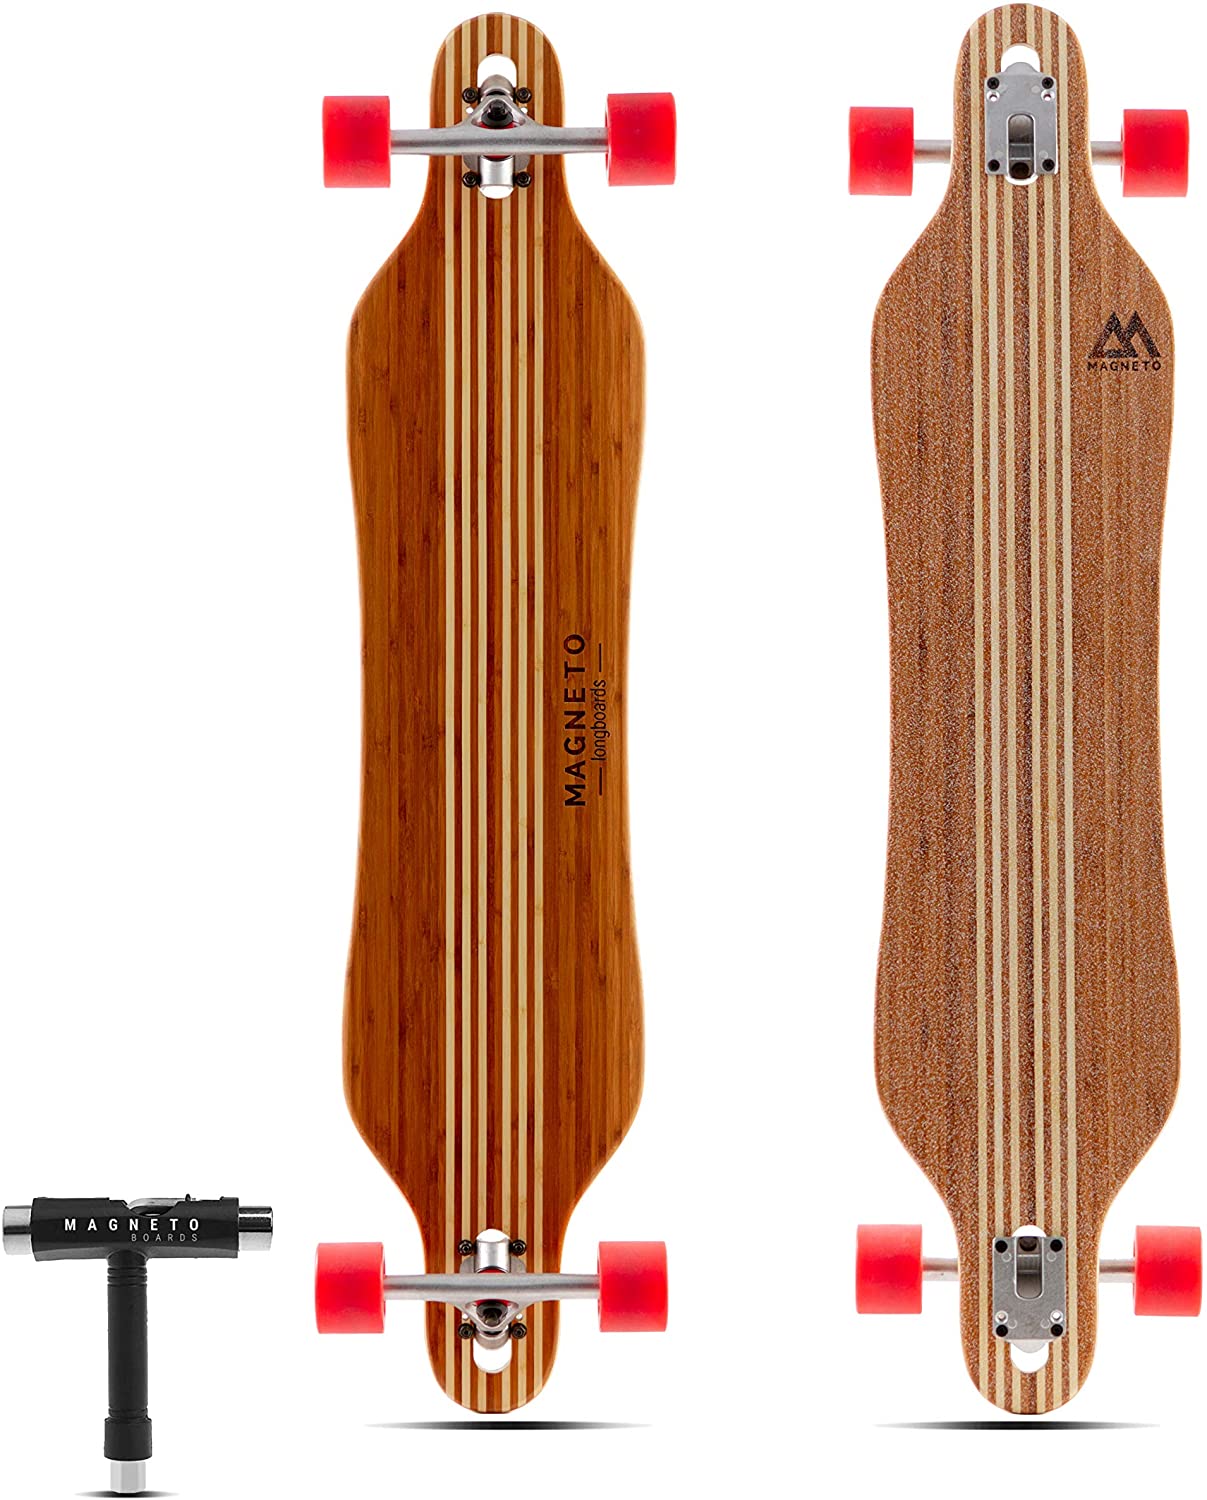 Bamboo with Hard Maple Core Dancing Cruiser Freestyle Cruising 42 inch Longboard Skateboards Magneto Hana Longboard Collection Carving